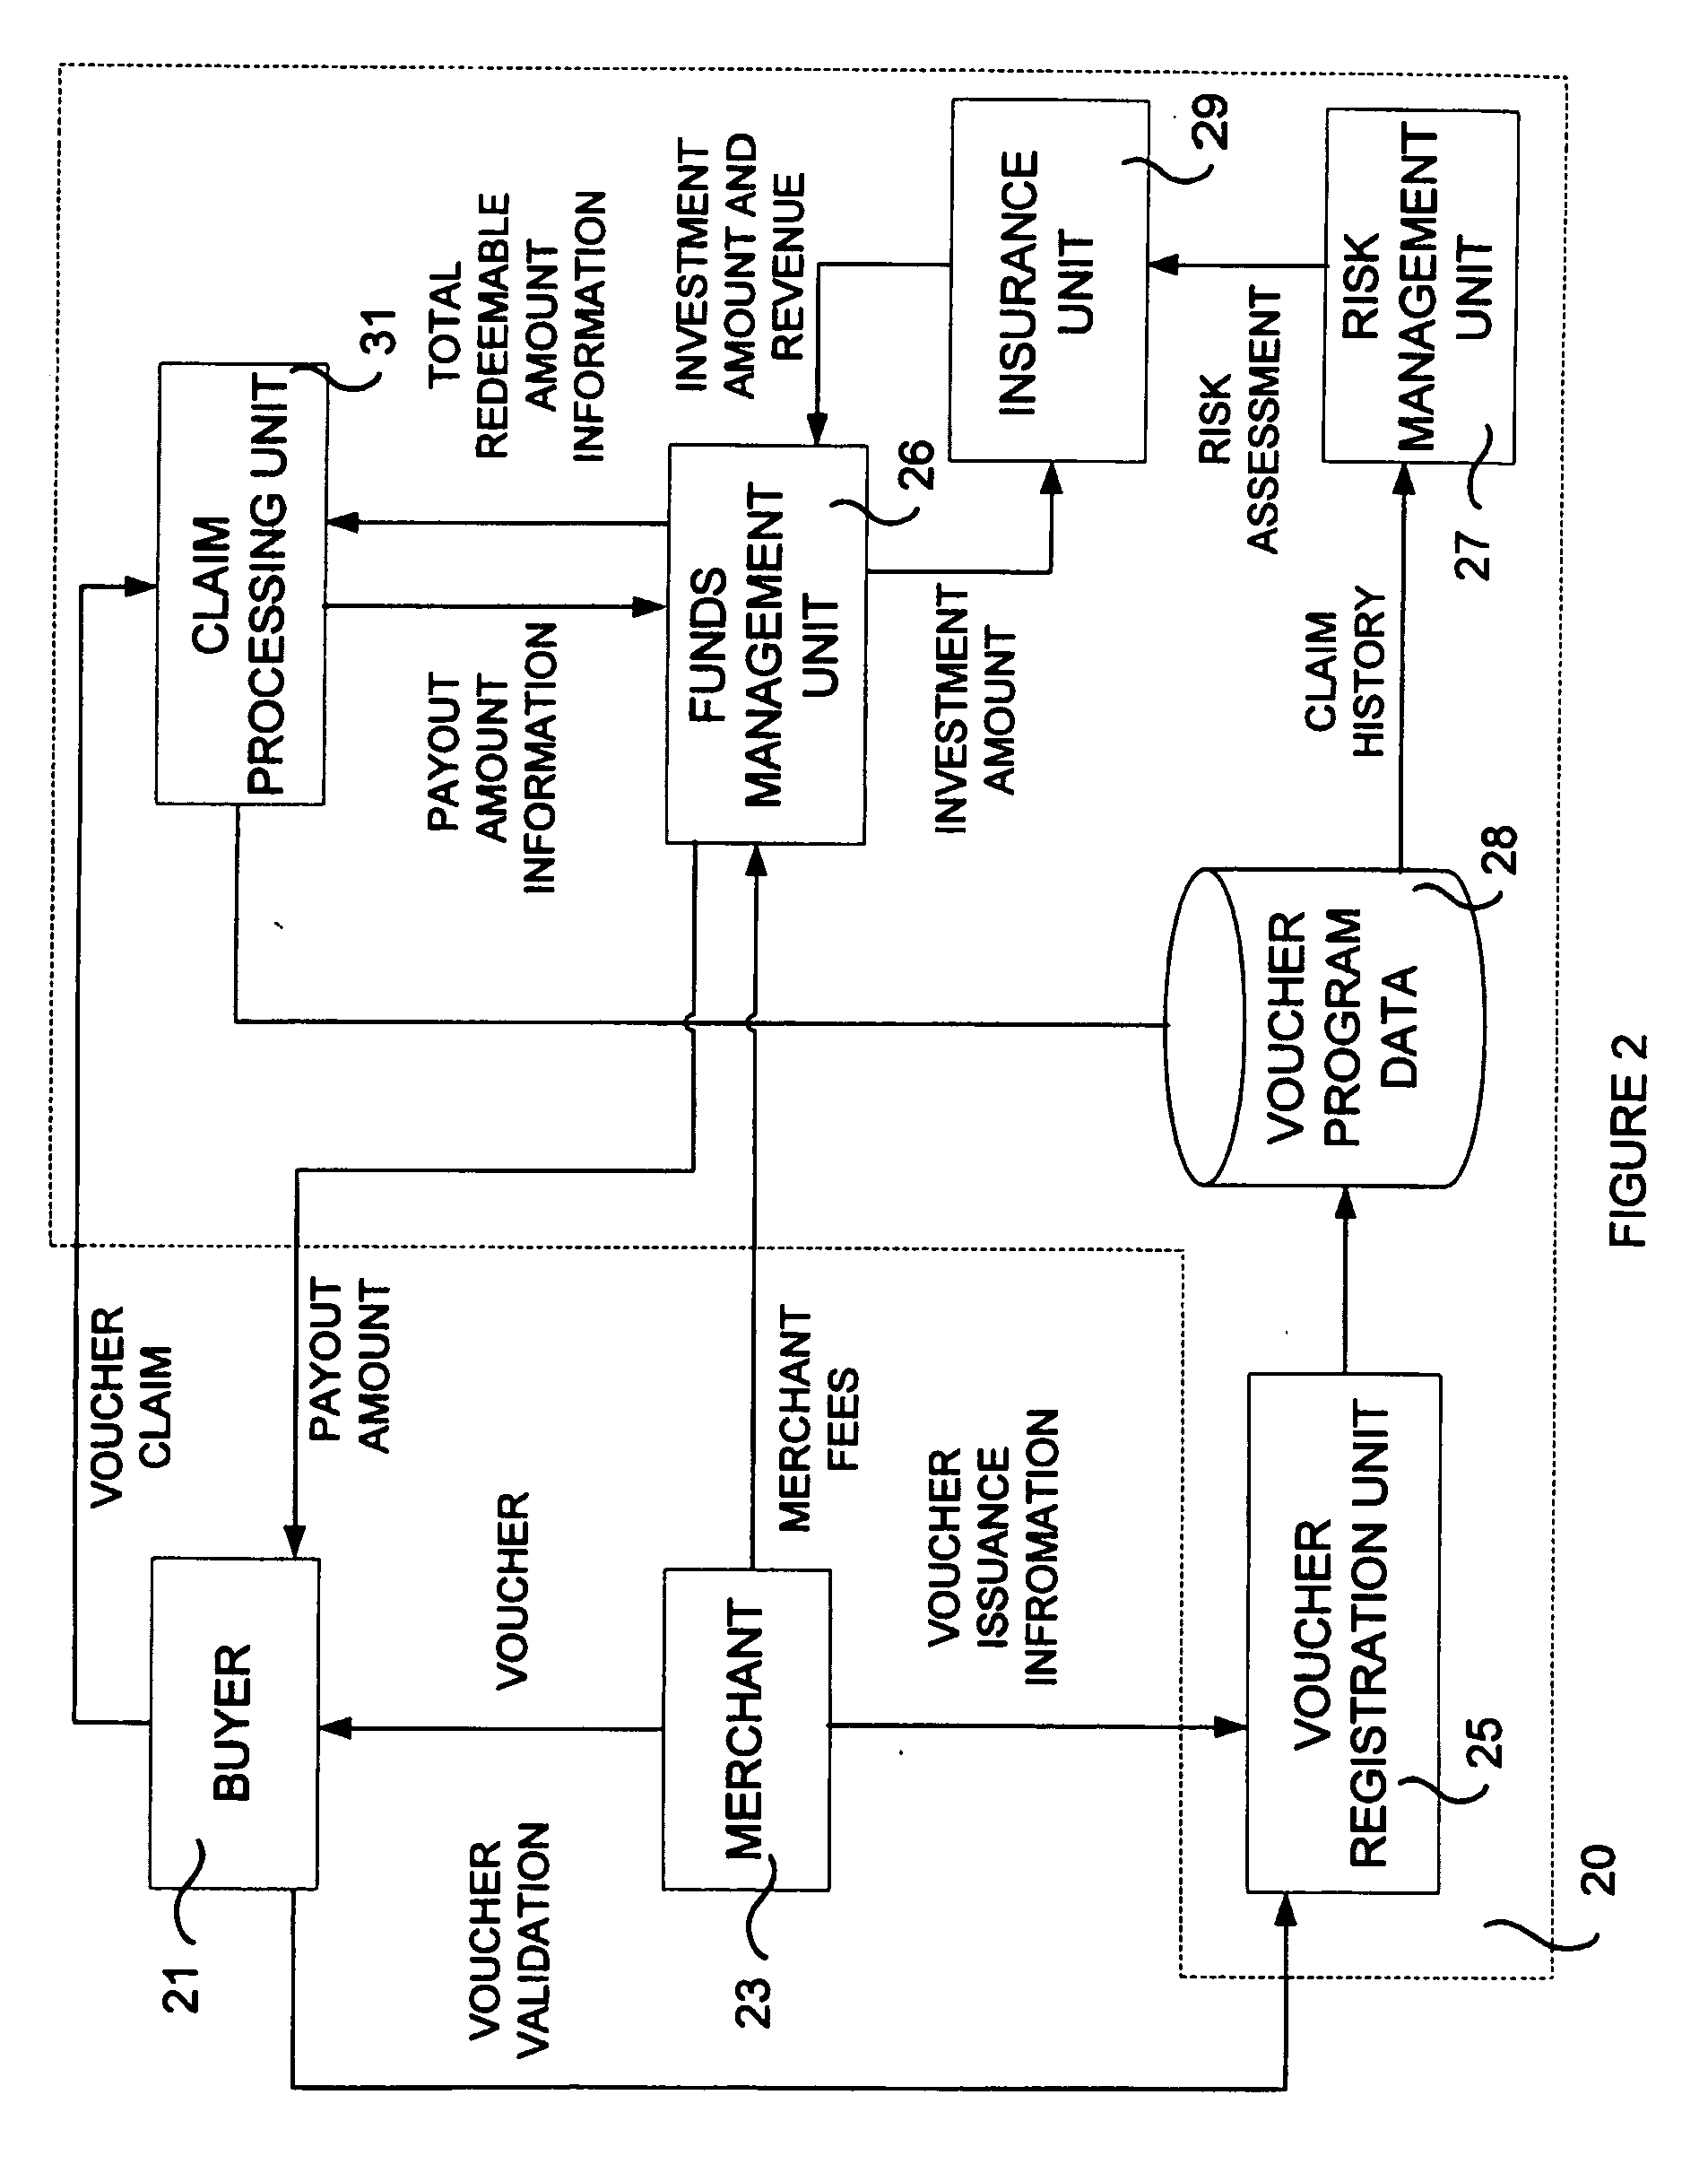 Method and system for redeemable vouchers using an insurance model